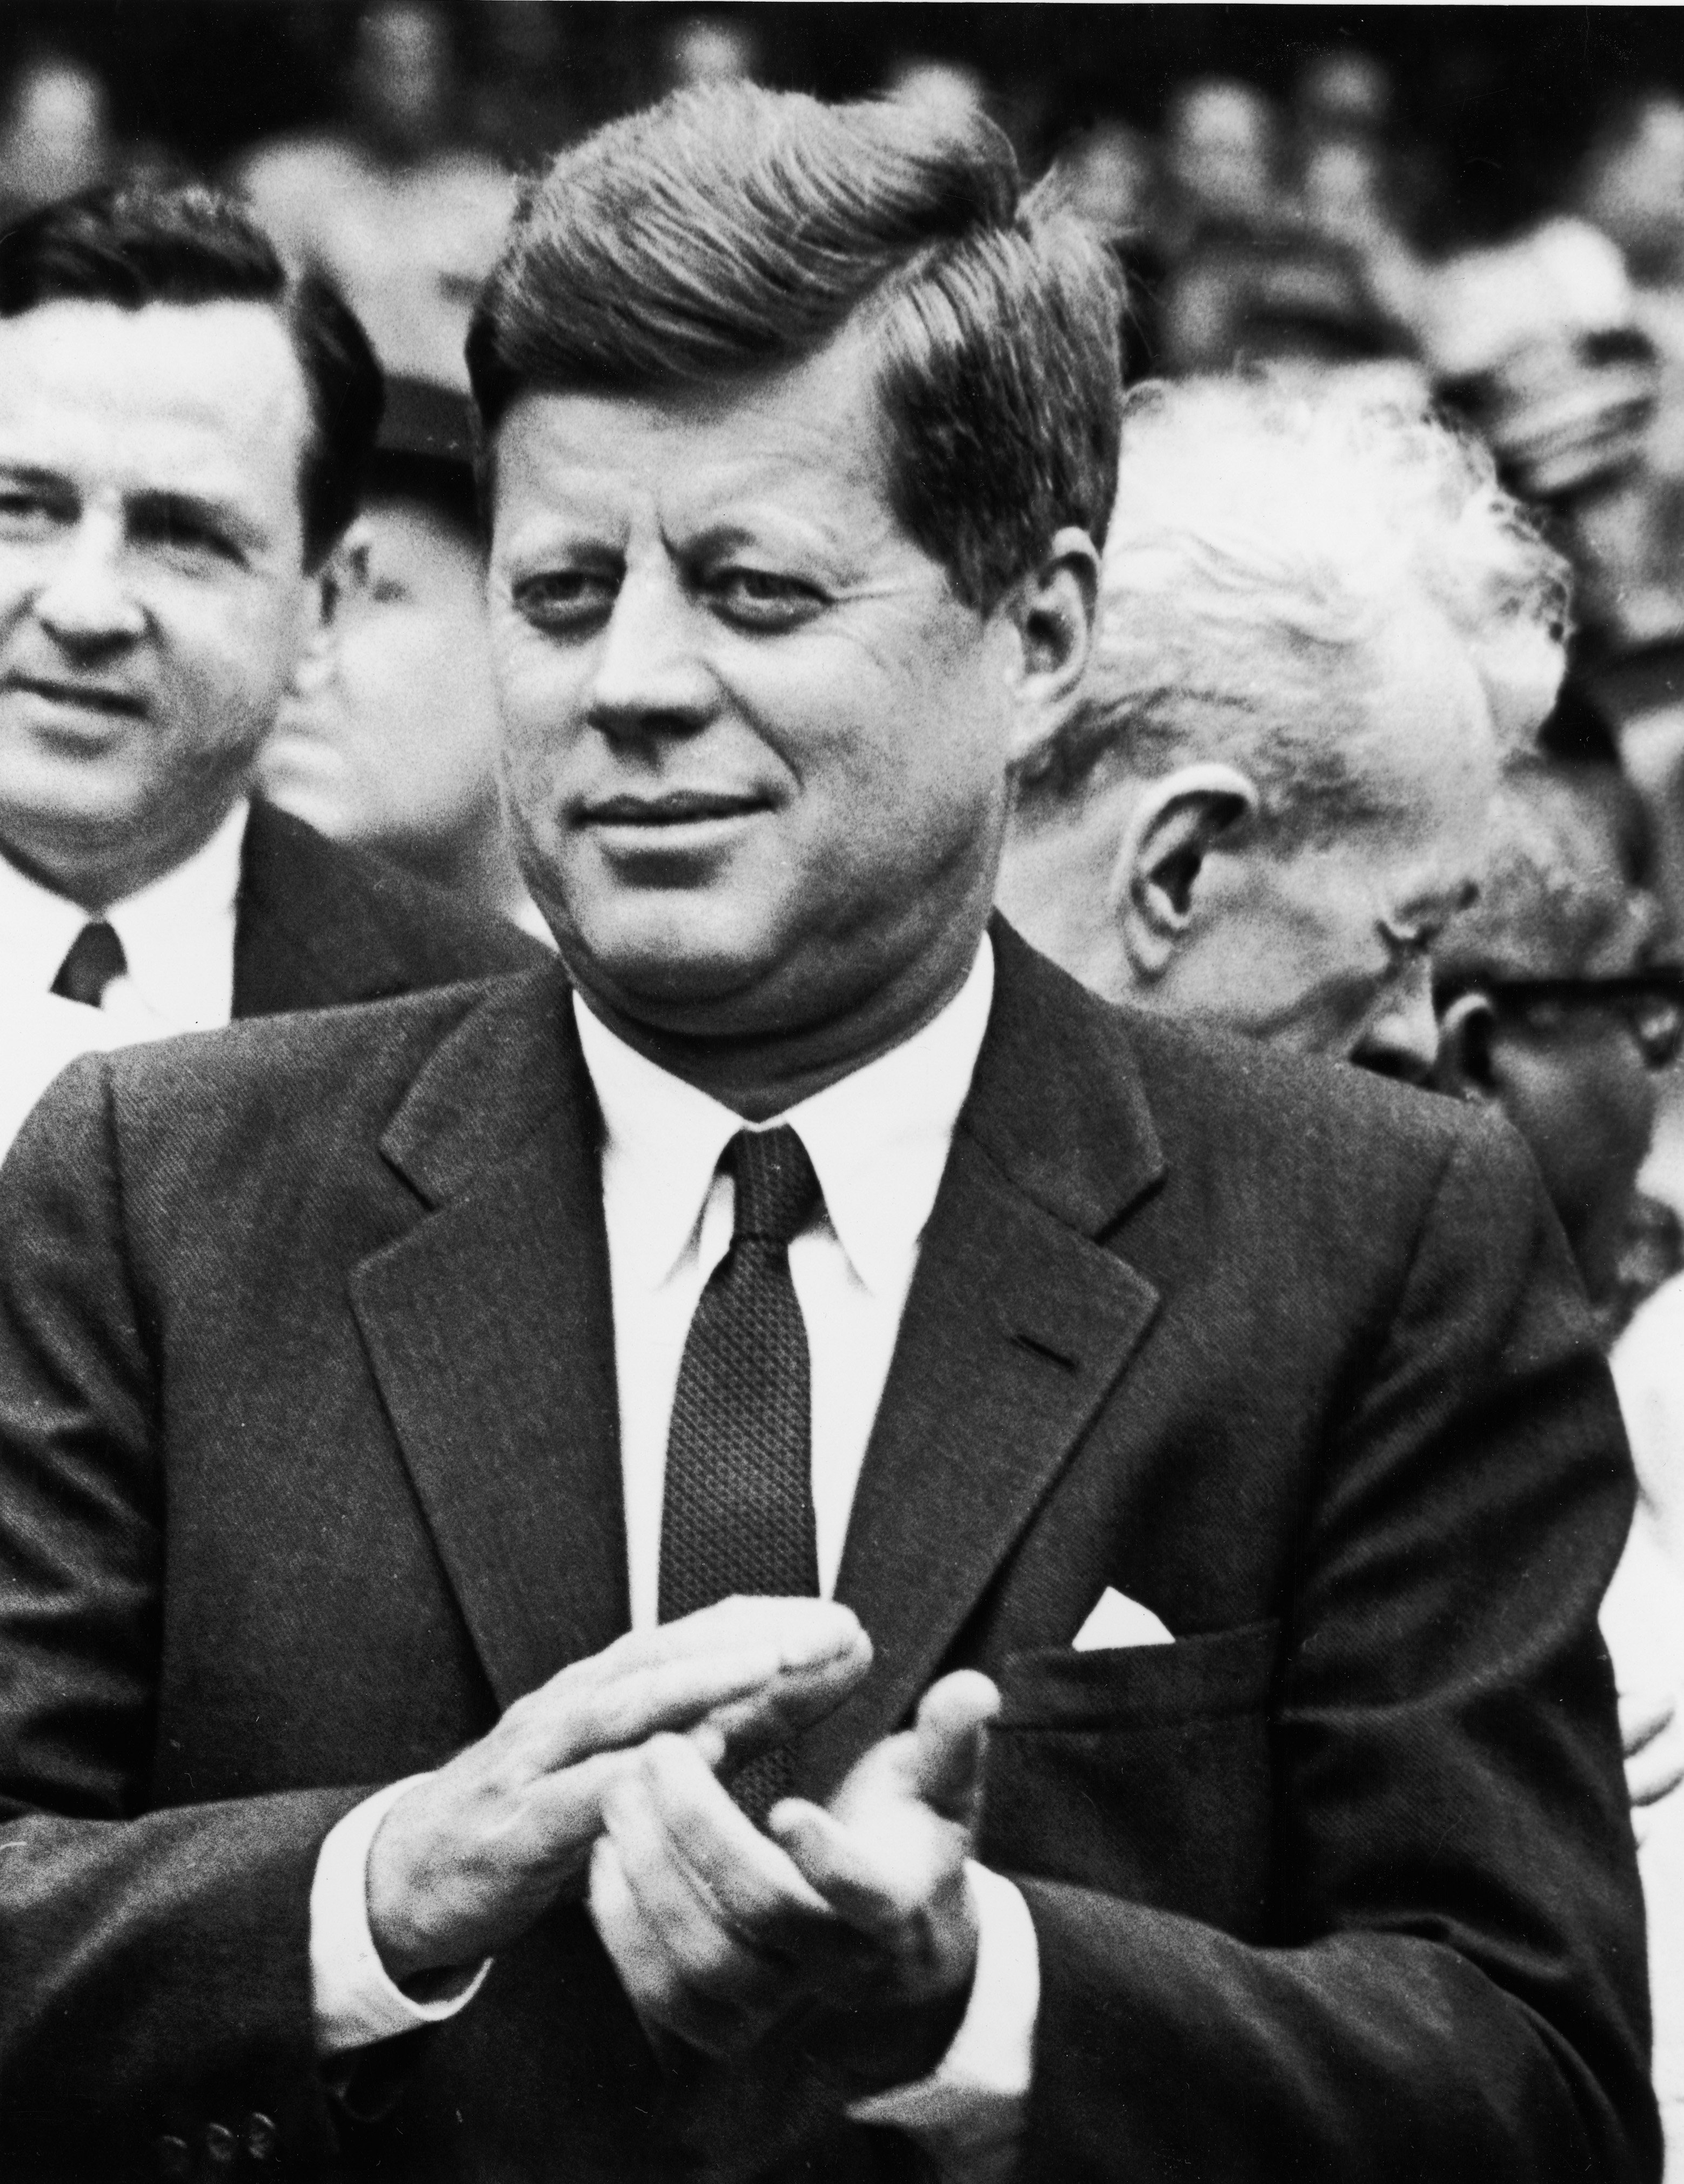 John F Kennedy was assassinated in 1963 | Photo: Getty Images